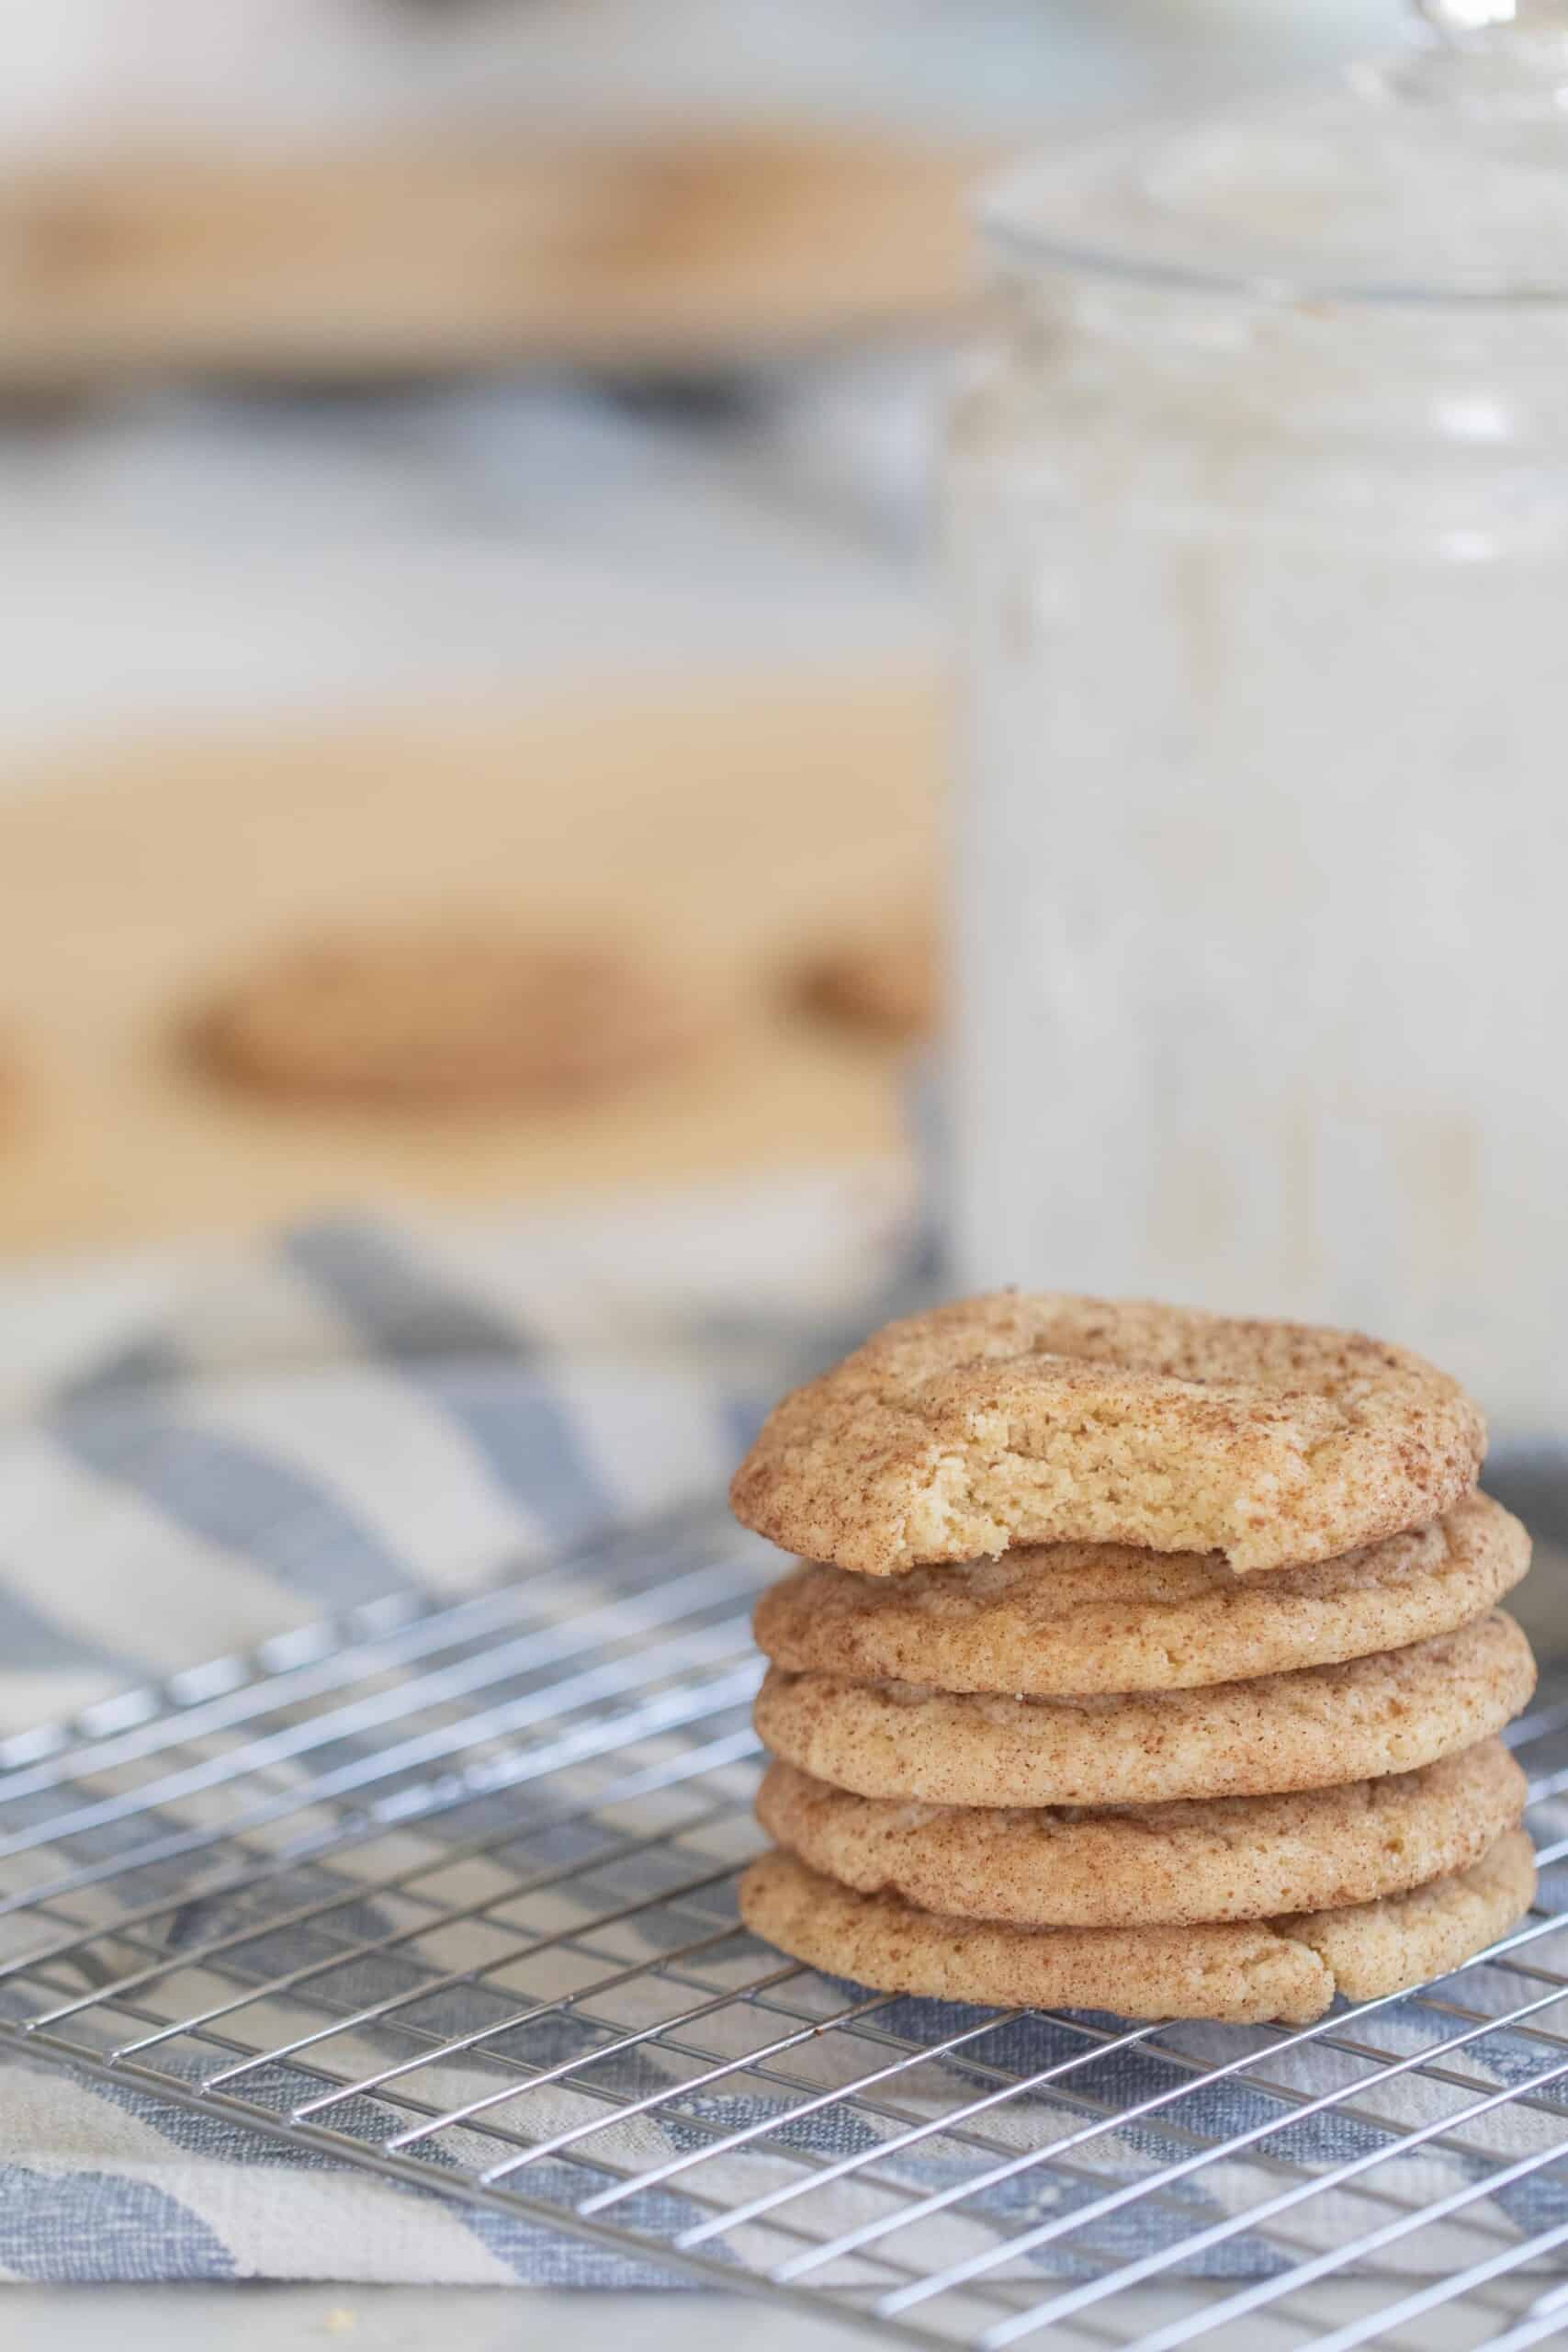 five sourdough snickerdoodle cookies stacked up on a wire rack over a white and blue stripped towel with a glass of milk behind the stack of cookies